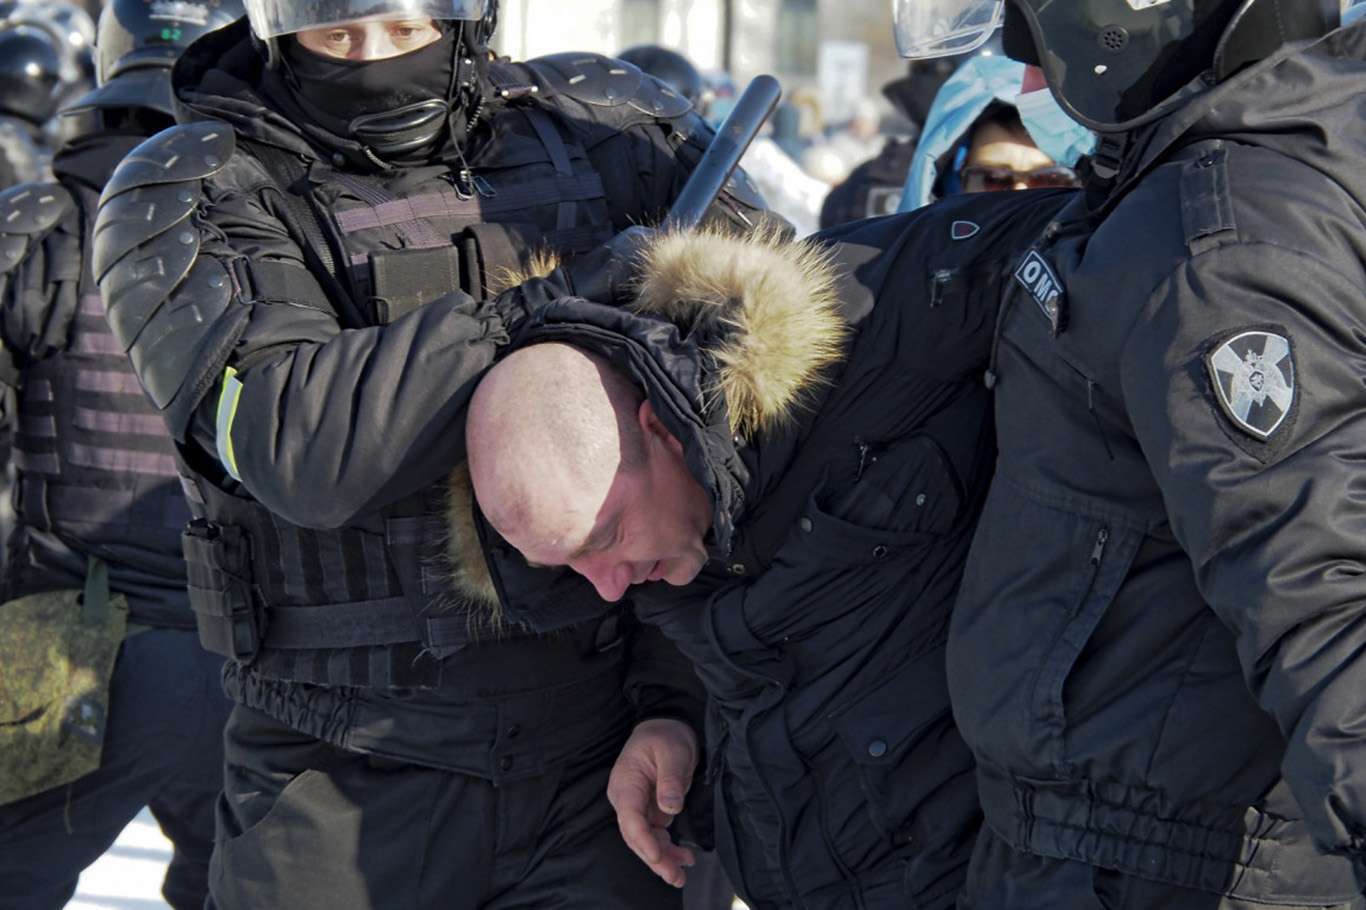 Russian police clashes with protesters in Moscow